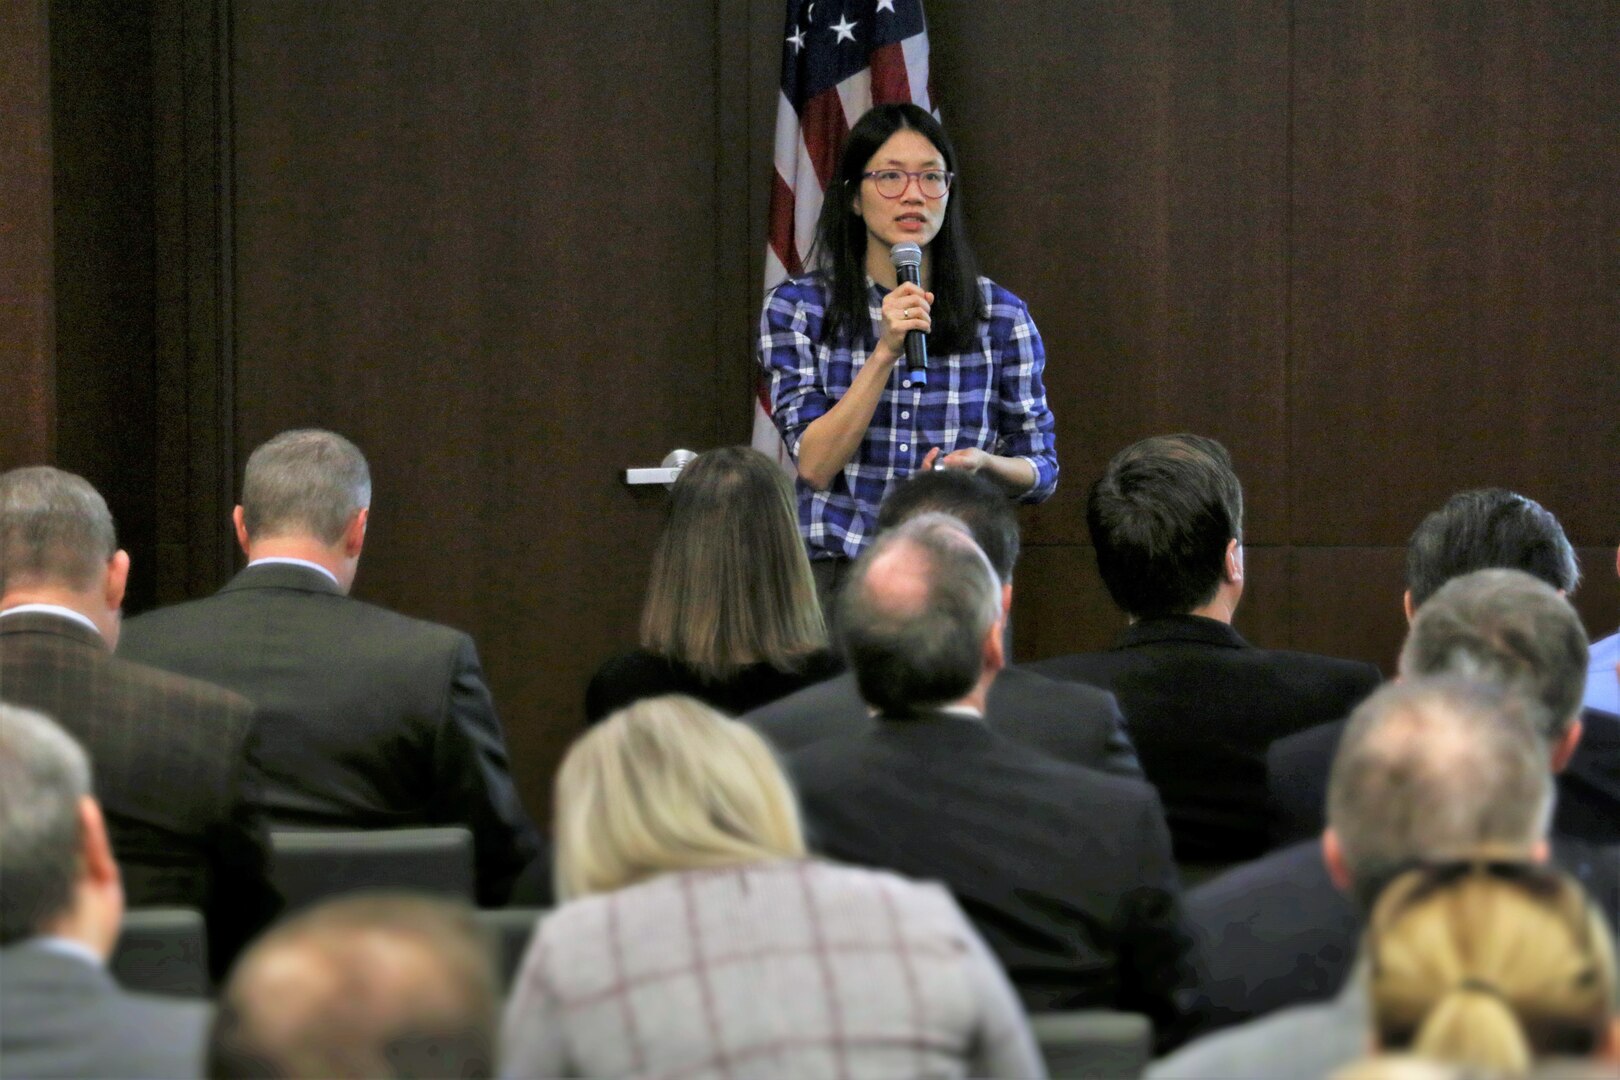 Naval Surface Warfare Center, Philadelphia Division (NSWCPD) Acquisition Support & Oversight Division Head Doris Tung addresses a crowd during the Command’s 2019 Industry Day in Philadelphia. NSWCPD conducted a virtual Industry Day event earlier this year, which linked key industries with contracting opportunities at the organization.